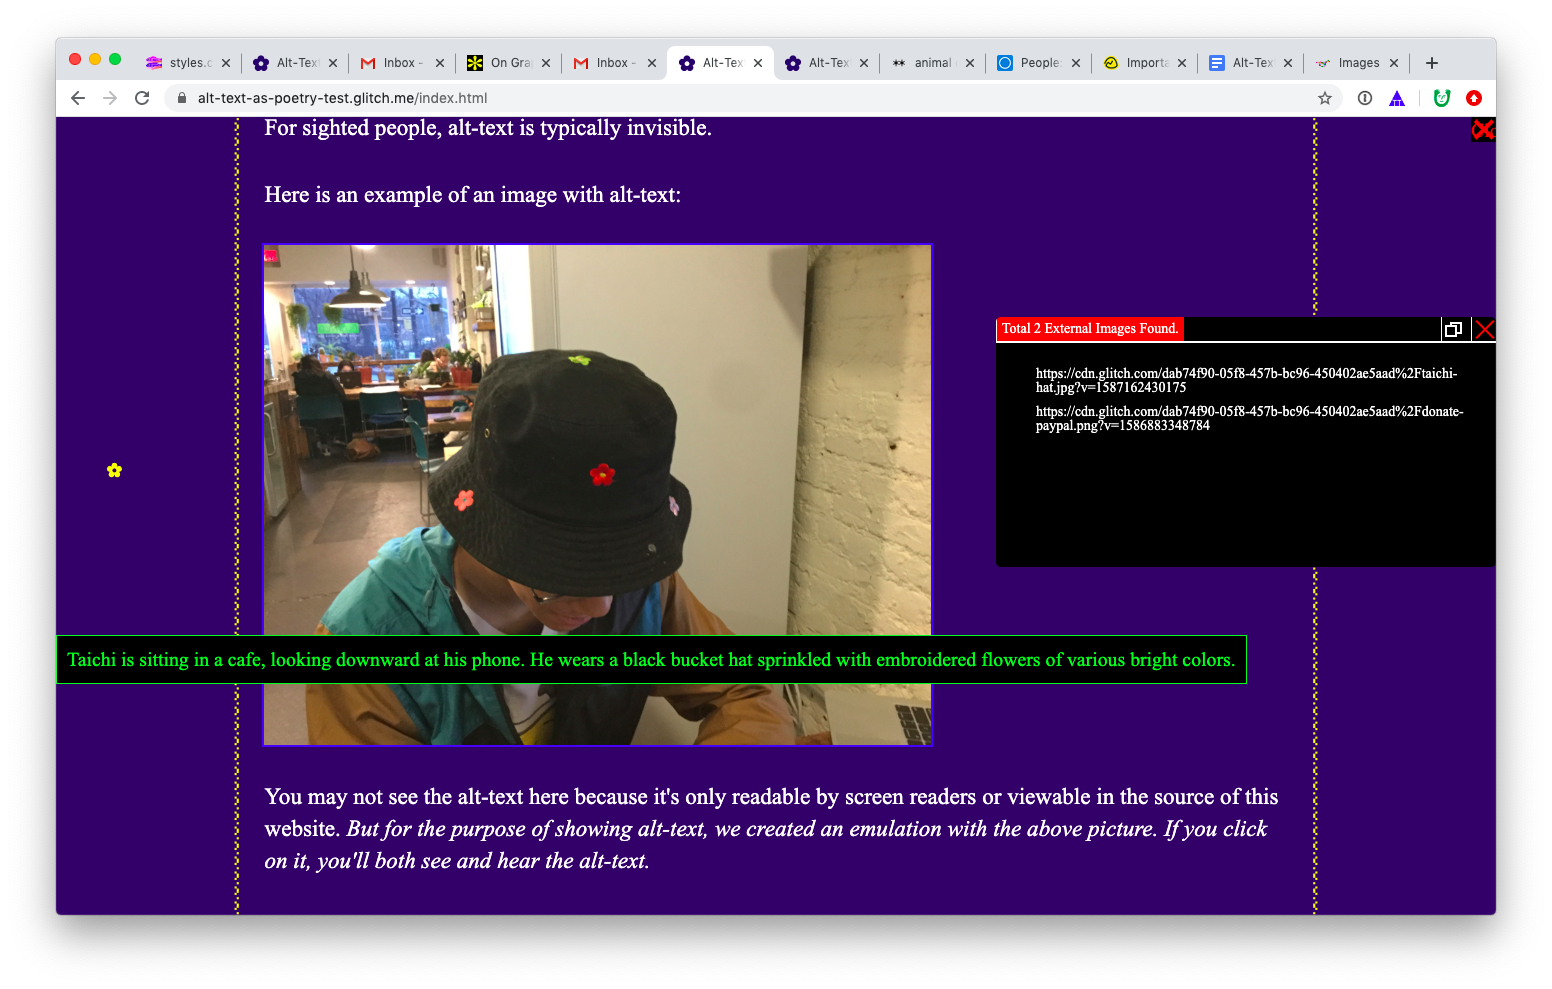 A screenshot of a computer browser window showing the Alt-Text Chrome extension's functionality. The alt-text 'Taichi is sitting in a cafe, looking downward at his phone. He wears a black bucket hat with embroidered flowers of various bright colors' appears visibly in lime green text on a black background superimposed on top of the actual image. The extension has another black window that says, 'Total 2 External Images Found.'